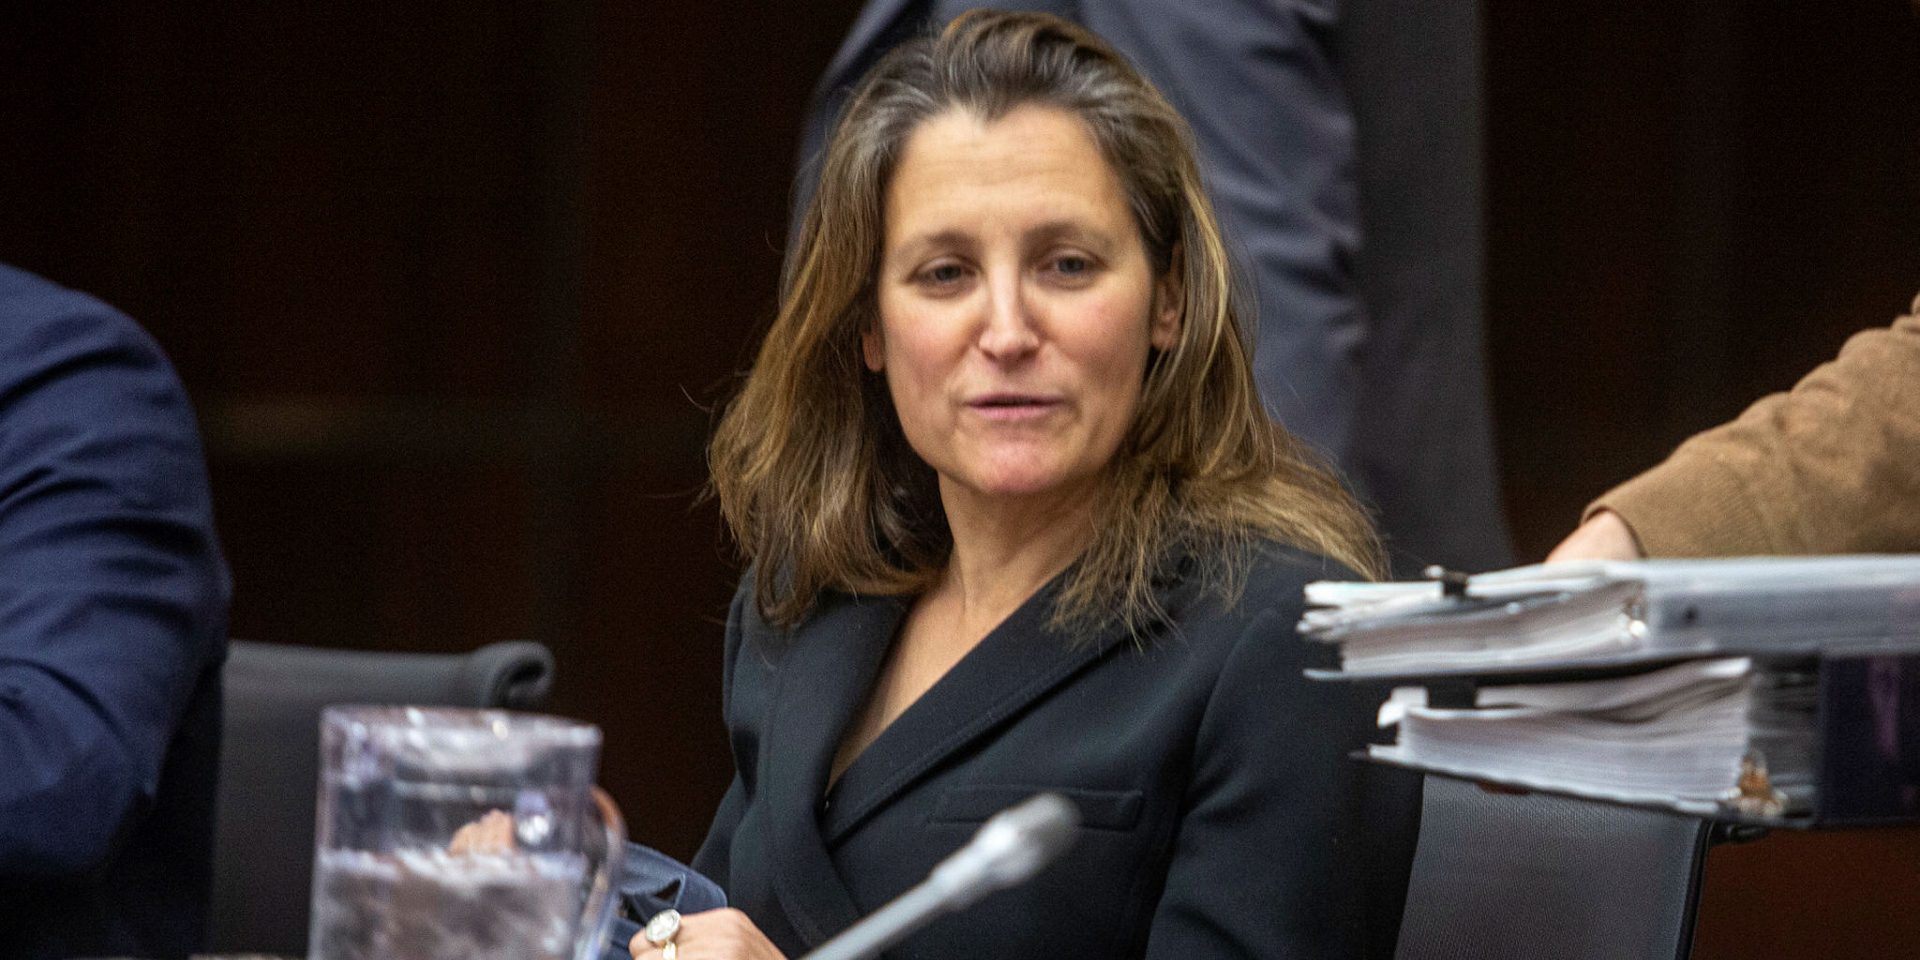 Minister of Finance Chrystia Freeland attends the House of Commons standing committee on Finance meeting in Ottawa on  Nov. 28, 2022. Andrew Meade